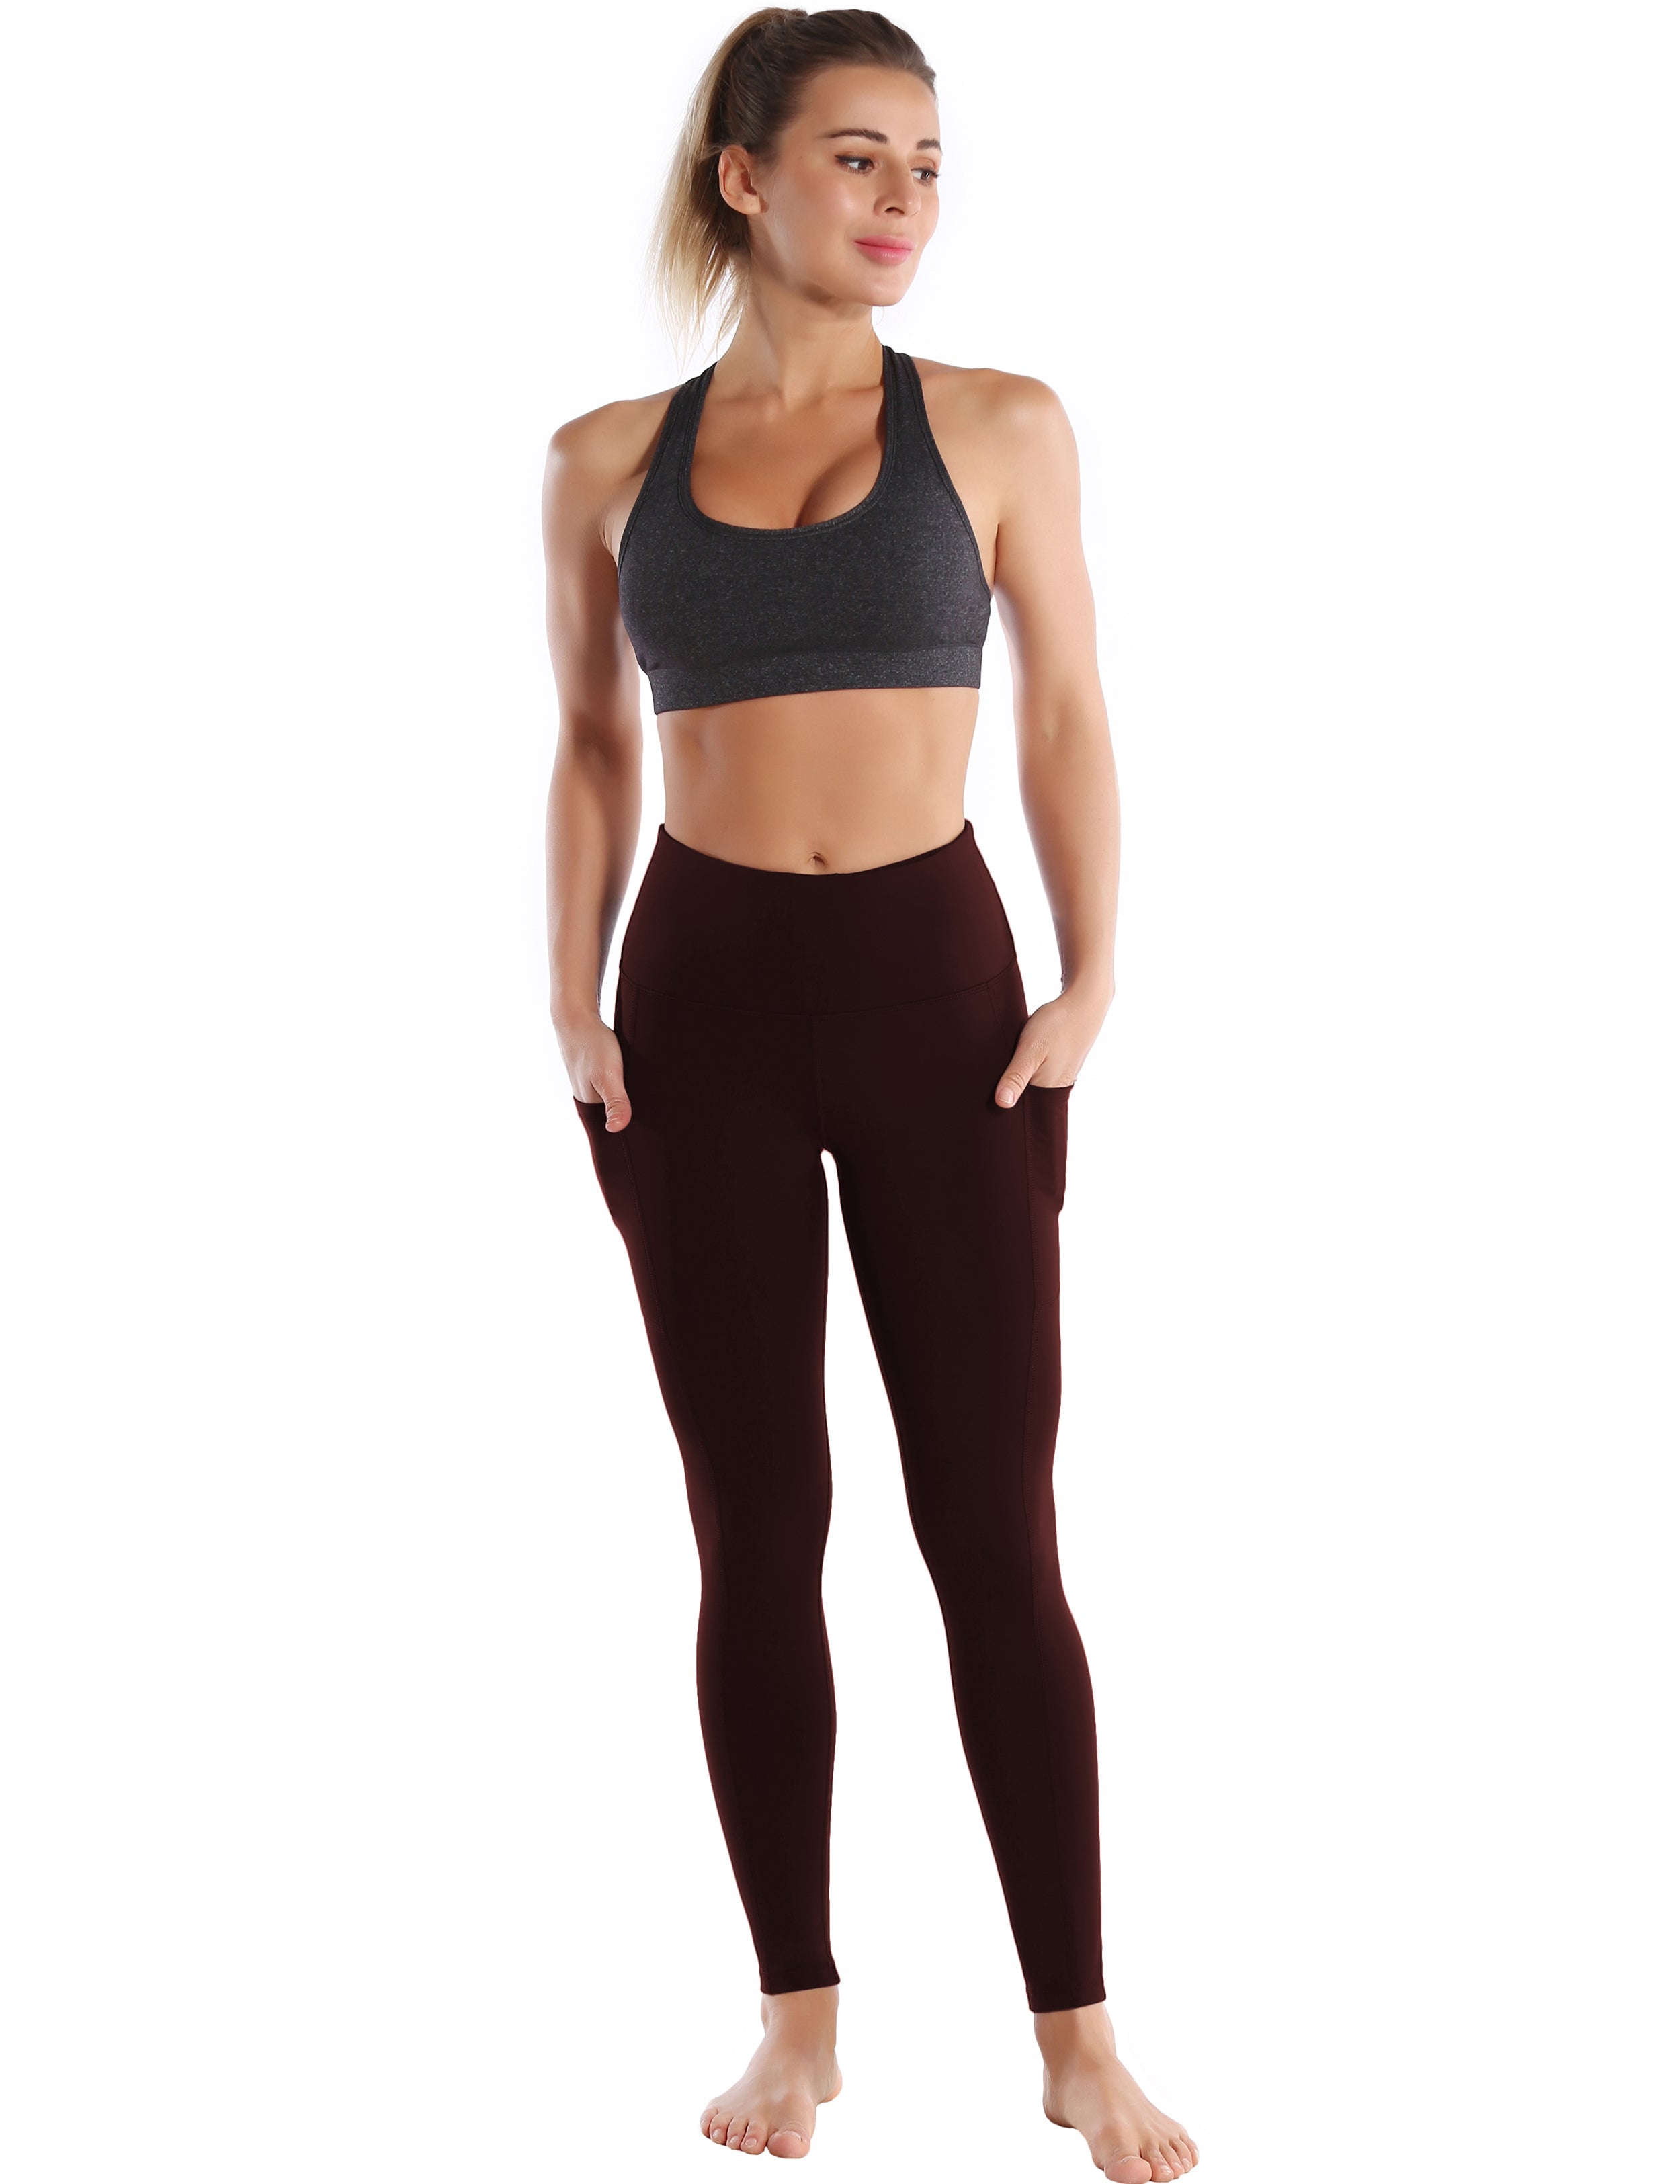 Hip Line Side Pockets Biking Pants mahoganymaroon Sexy Hip Line Side Pockets 75%Nylon/25%Spandex Fabric doesn't attract lint easily 4-way stretch No see-through Moisture-wicking Tummy control Inner pocket Two lengths